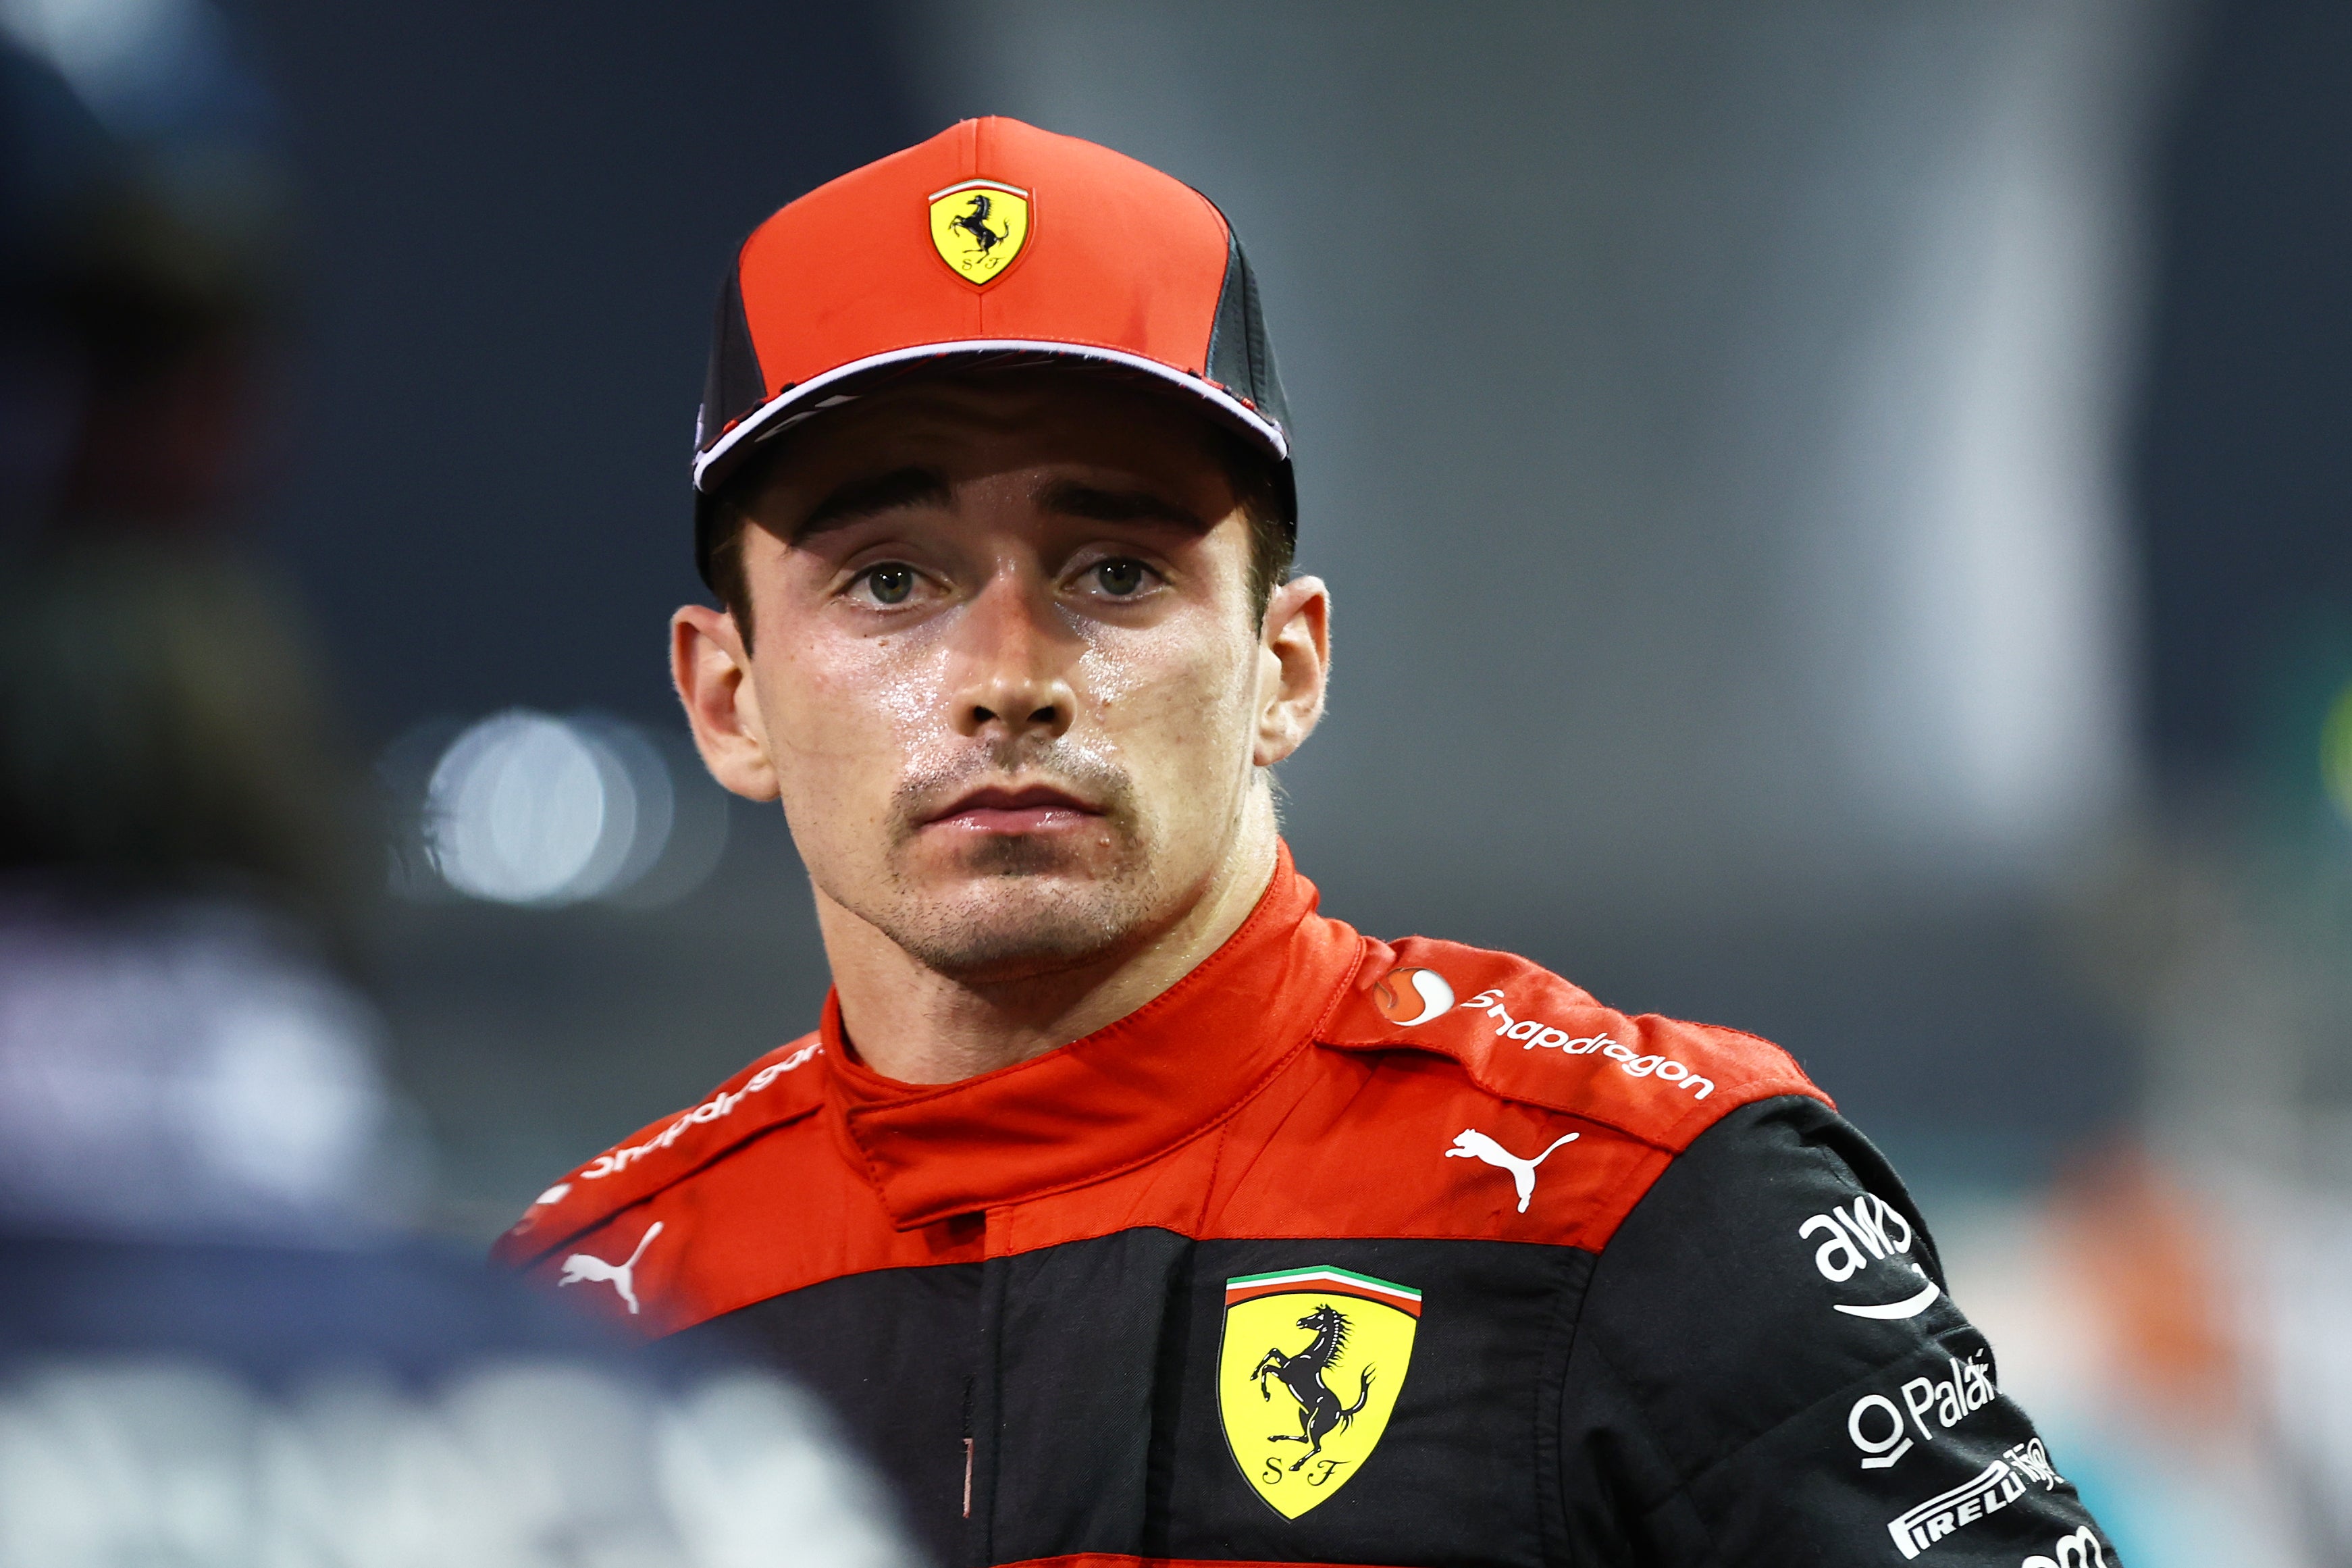 Second placed Charles Leclerc of Monaco and Ferrari looks on in parc ferme during the F1 Grand Prix of Abu Dhabi at Yas Marina Circuit